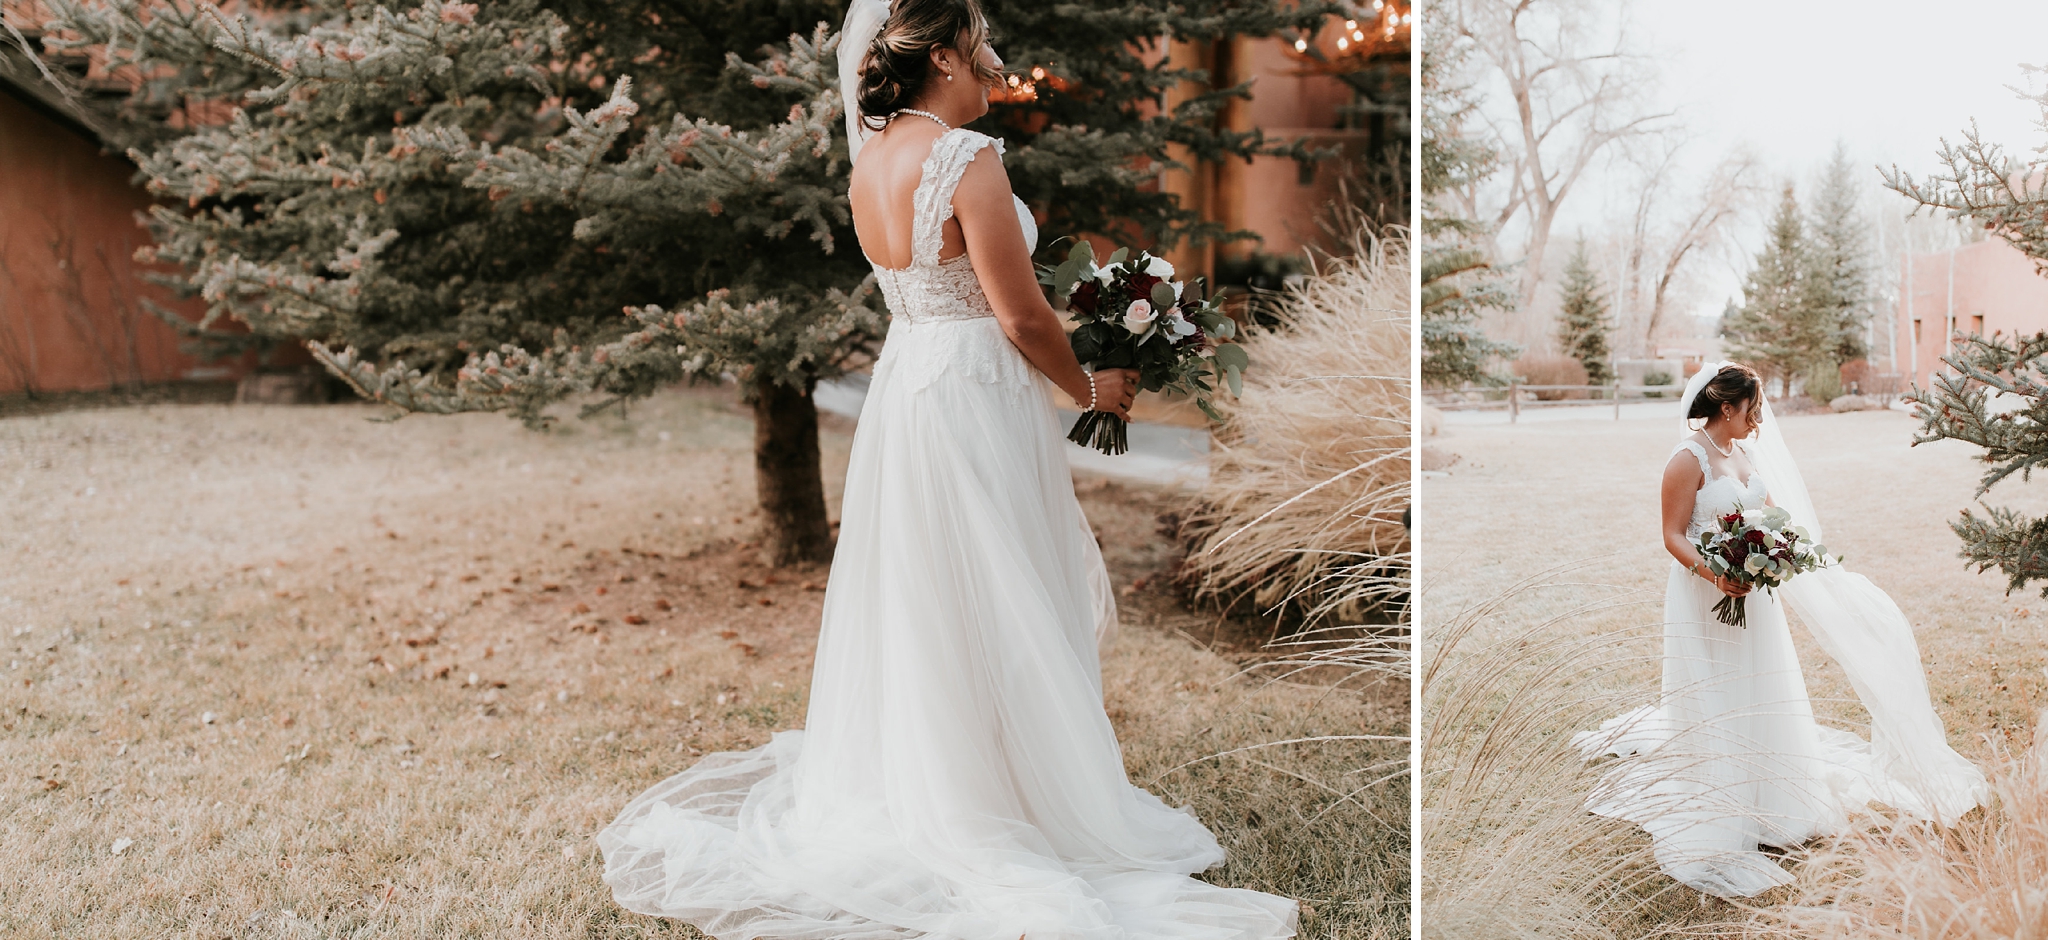 Alicia+lucia+photography+-+albuquerque+wedding+photographer+-+santa+fe+wedding+photography+-+new+mexico+wedding+photographer+-+new+mexico+wedding+-+wedding+gowns+-+bridal+gowns+-+a+line+wedding+gown_0040.jpg